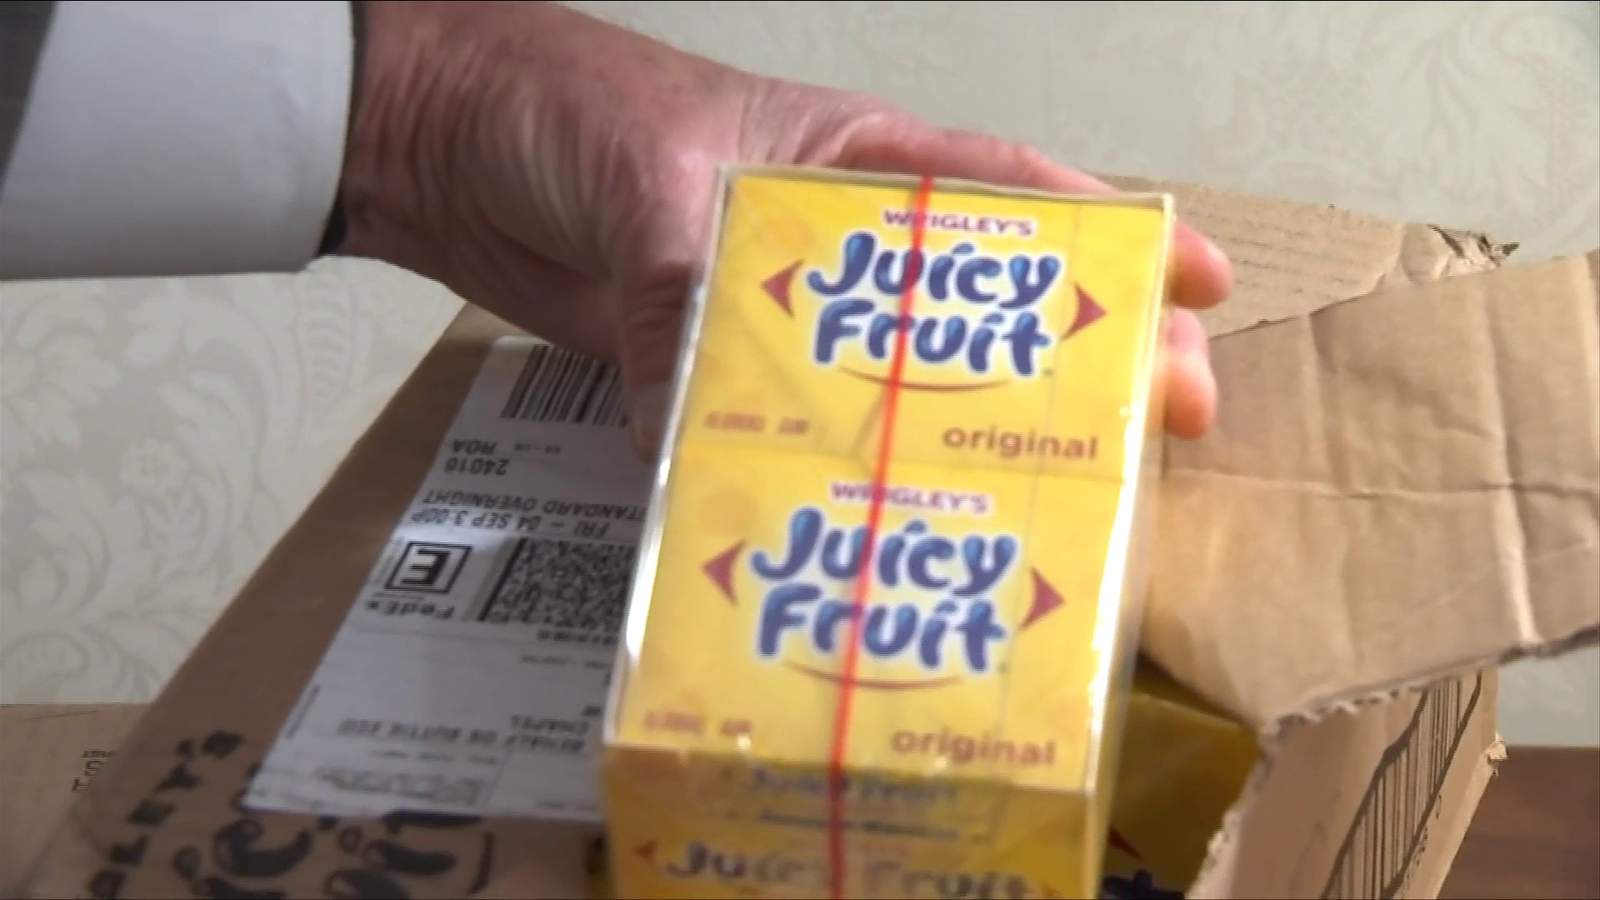 Take it to the grave: Roanoke man wants to be buried in Wrigley’s Gum casket - and it looks like he’ll get his wish